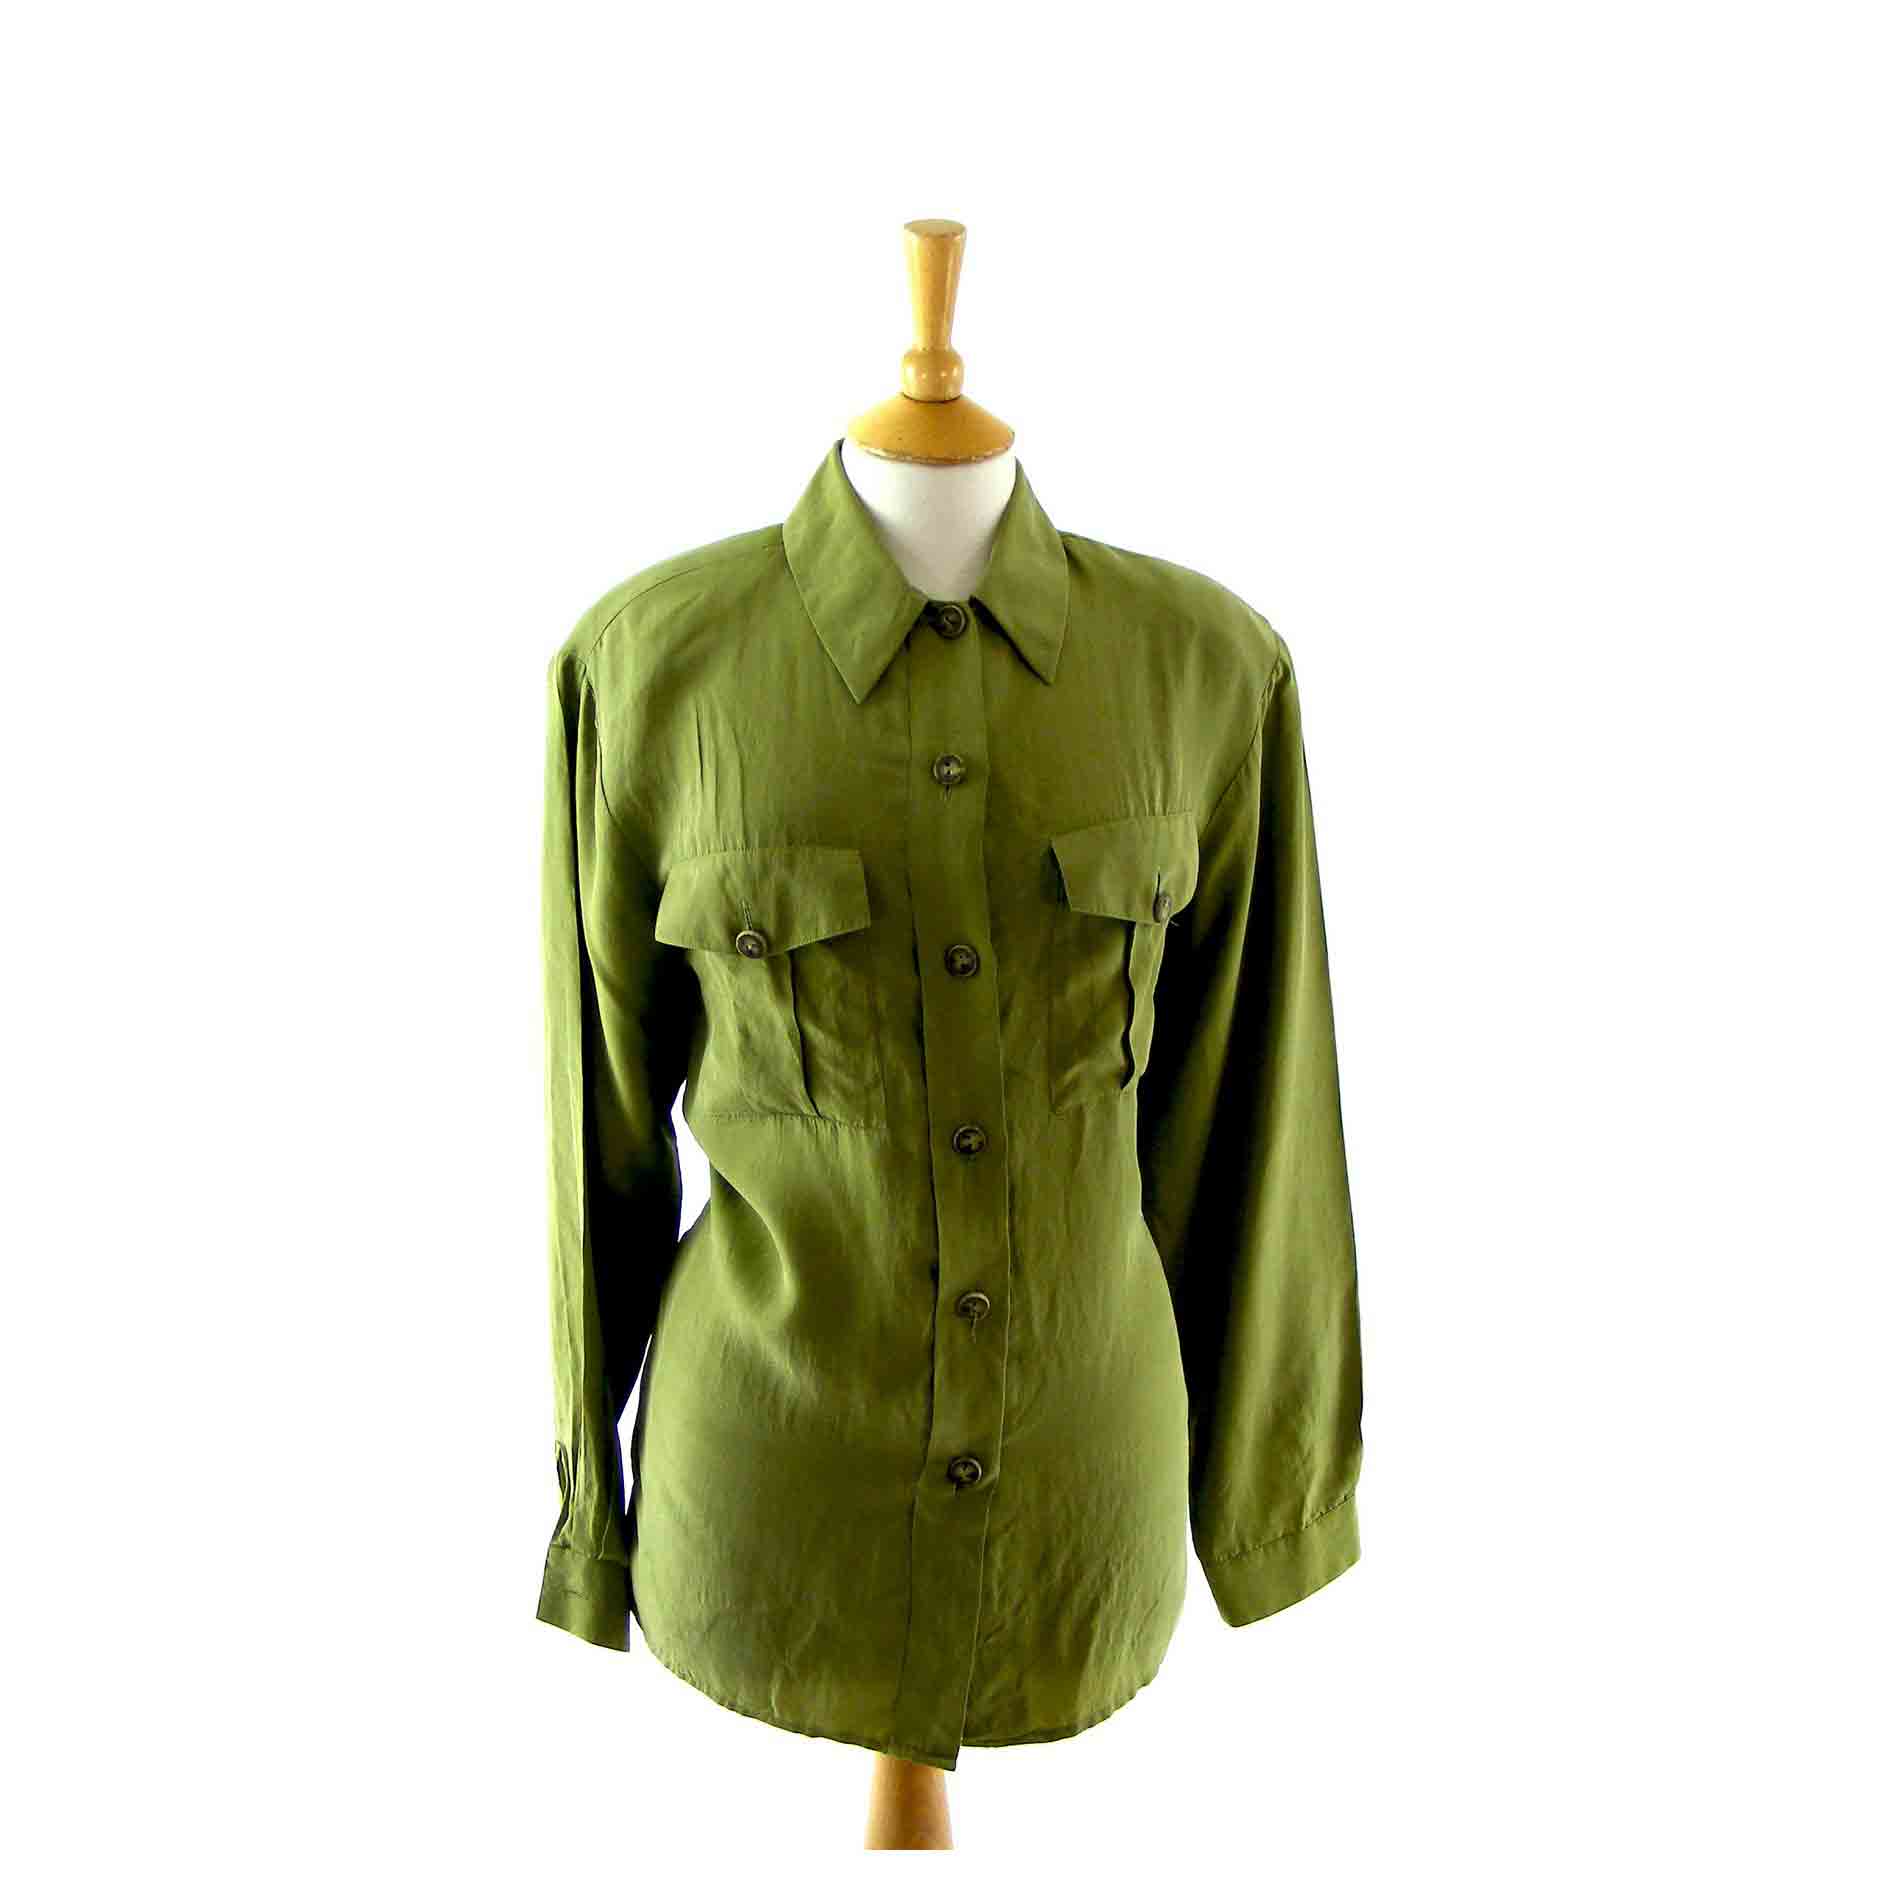 Lime green silk blouse - Blue 17 Vintage Clothing